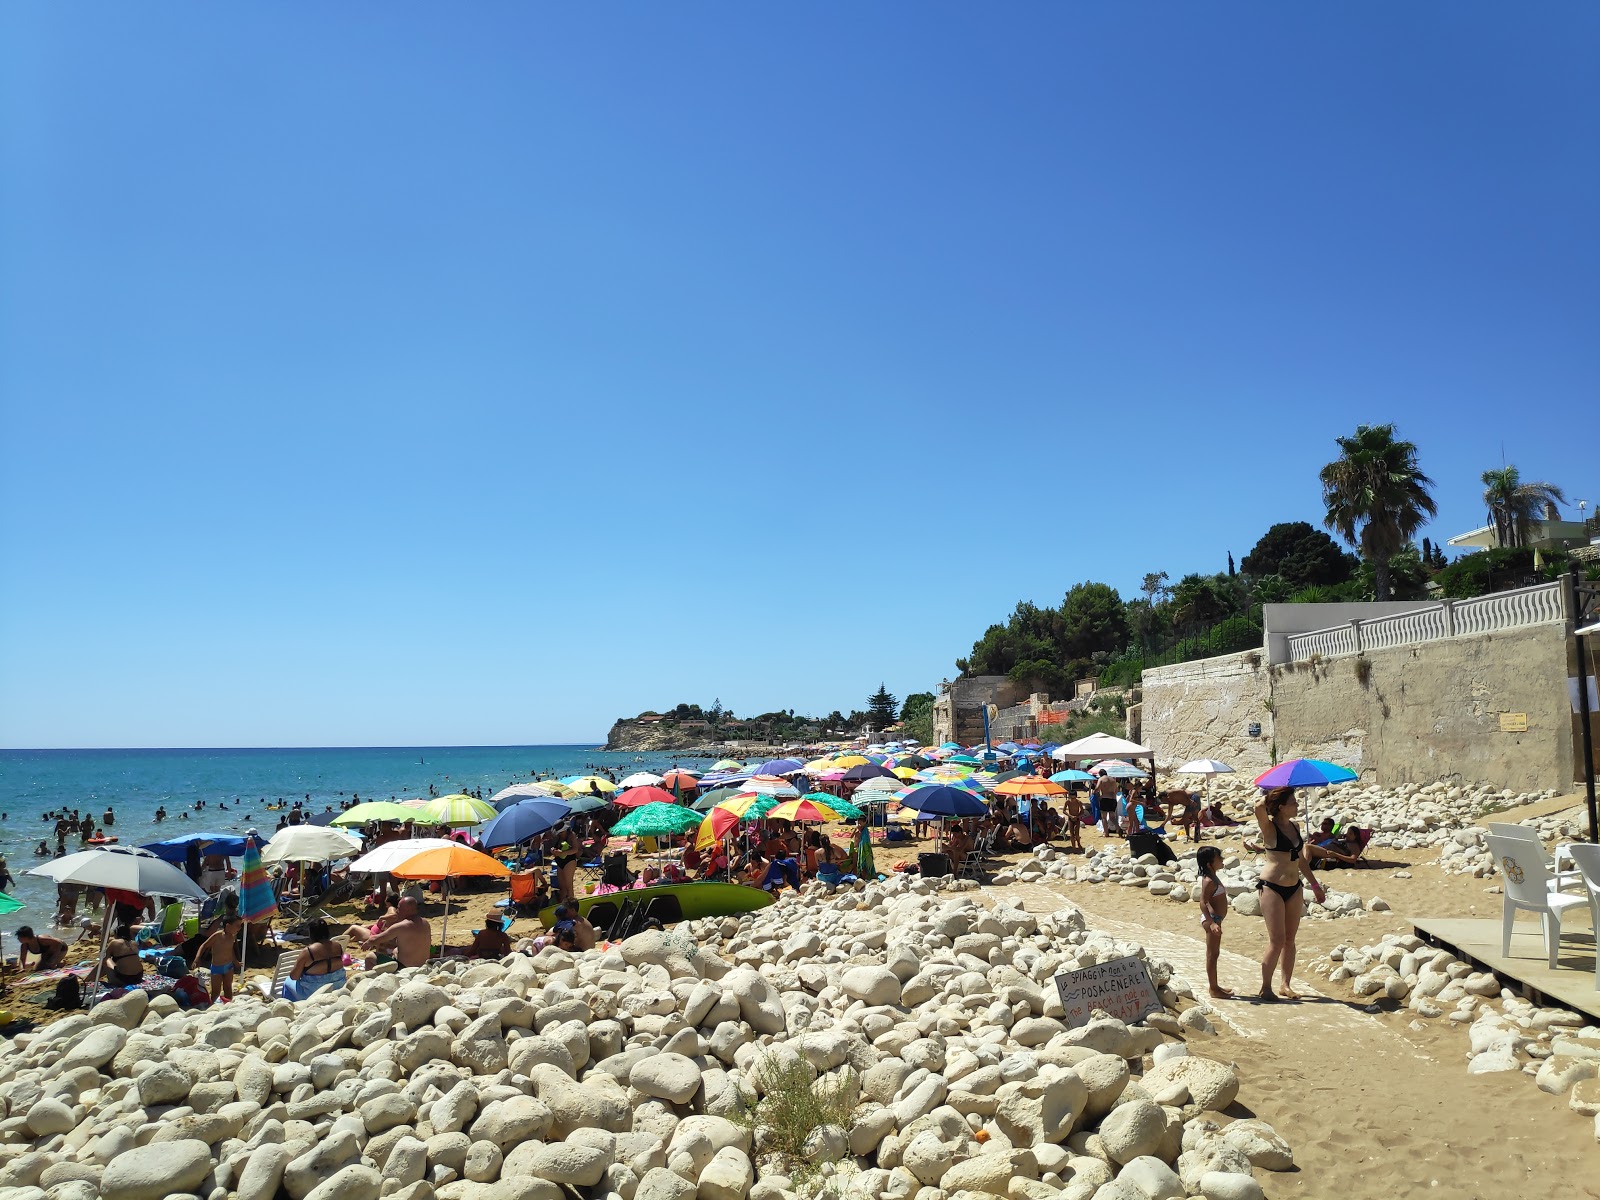 Photo of Spiaggia Di Gallina - popular place among relax connoisseurs